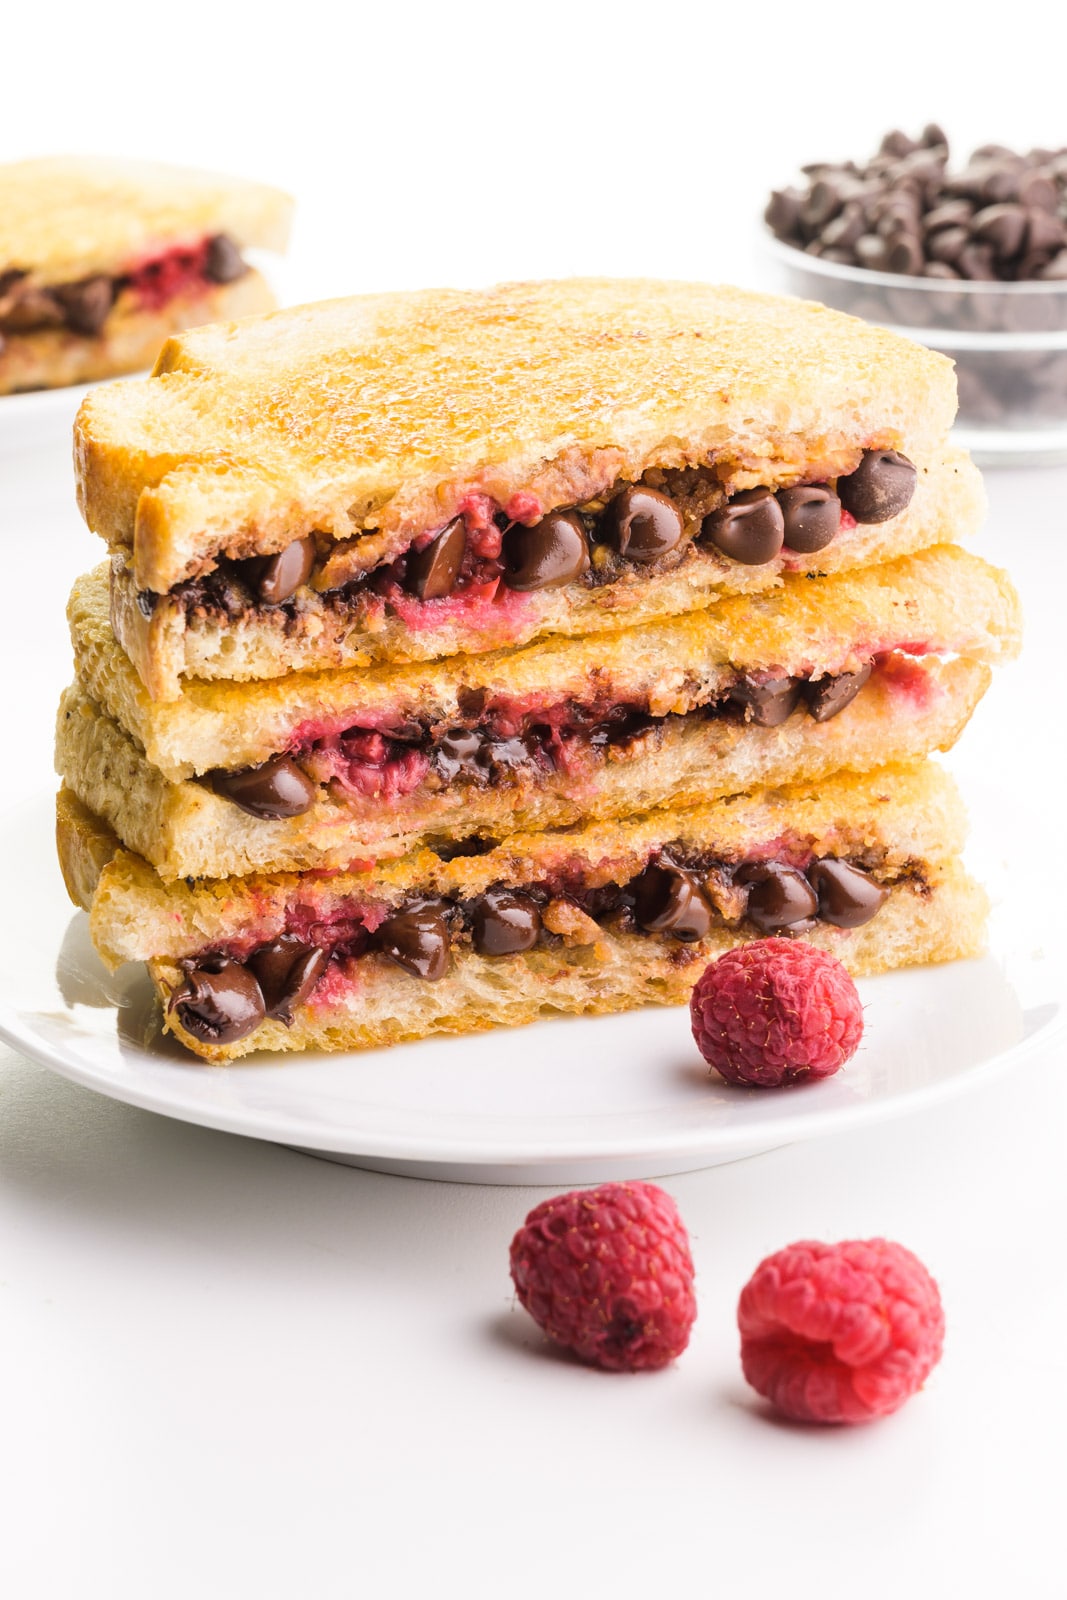 A stack of grilled sandwiches sits on a plate. They showcase melted chocolate and raspberries. There are fresh raspberries around the plate, and another sandwich and a bowl of chocolate chips in the background.